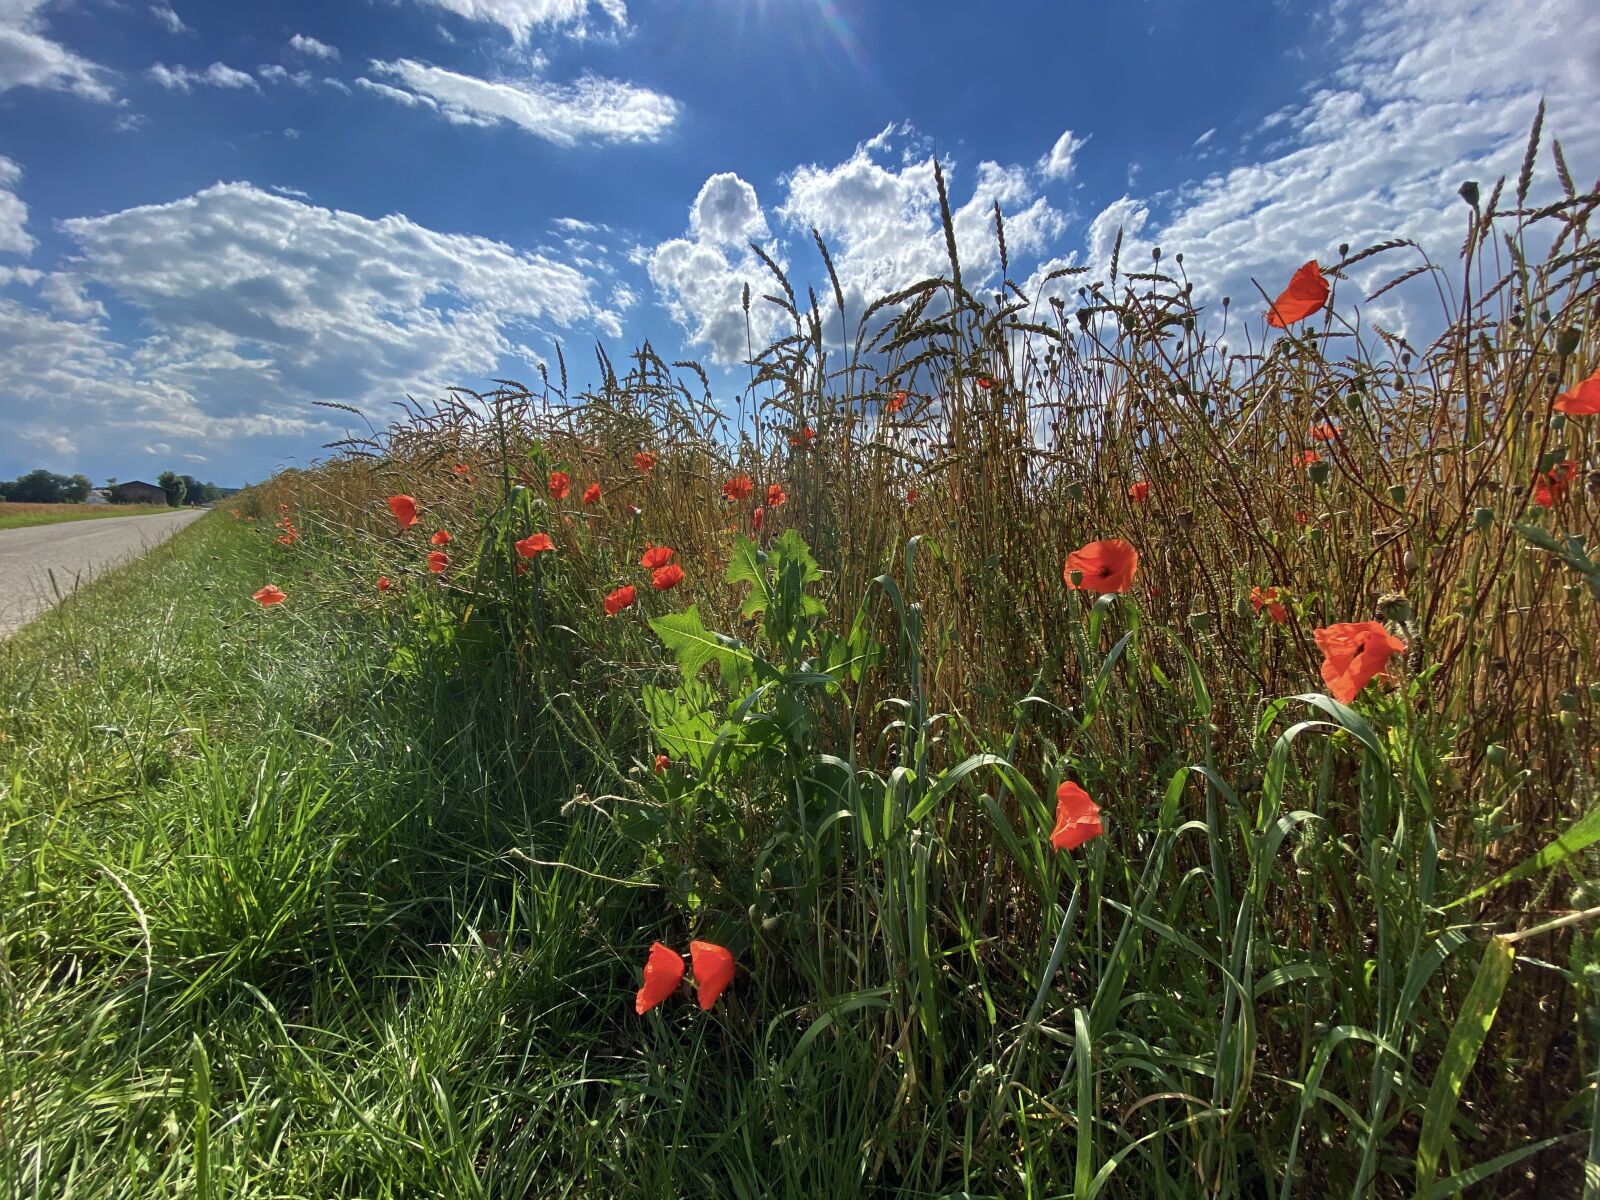 Apple iPhone 11 Pro Max sample photo. Summer, meadow, landscape photography